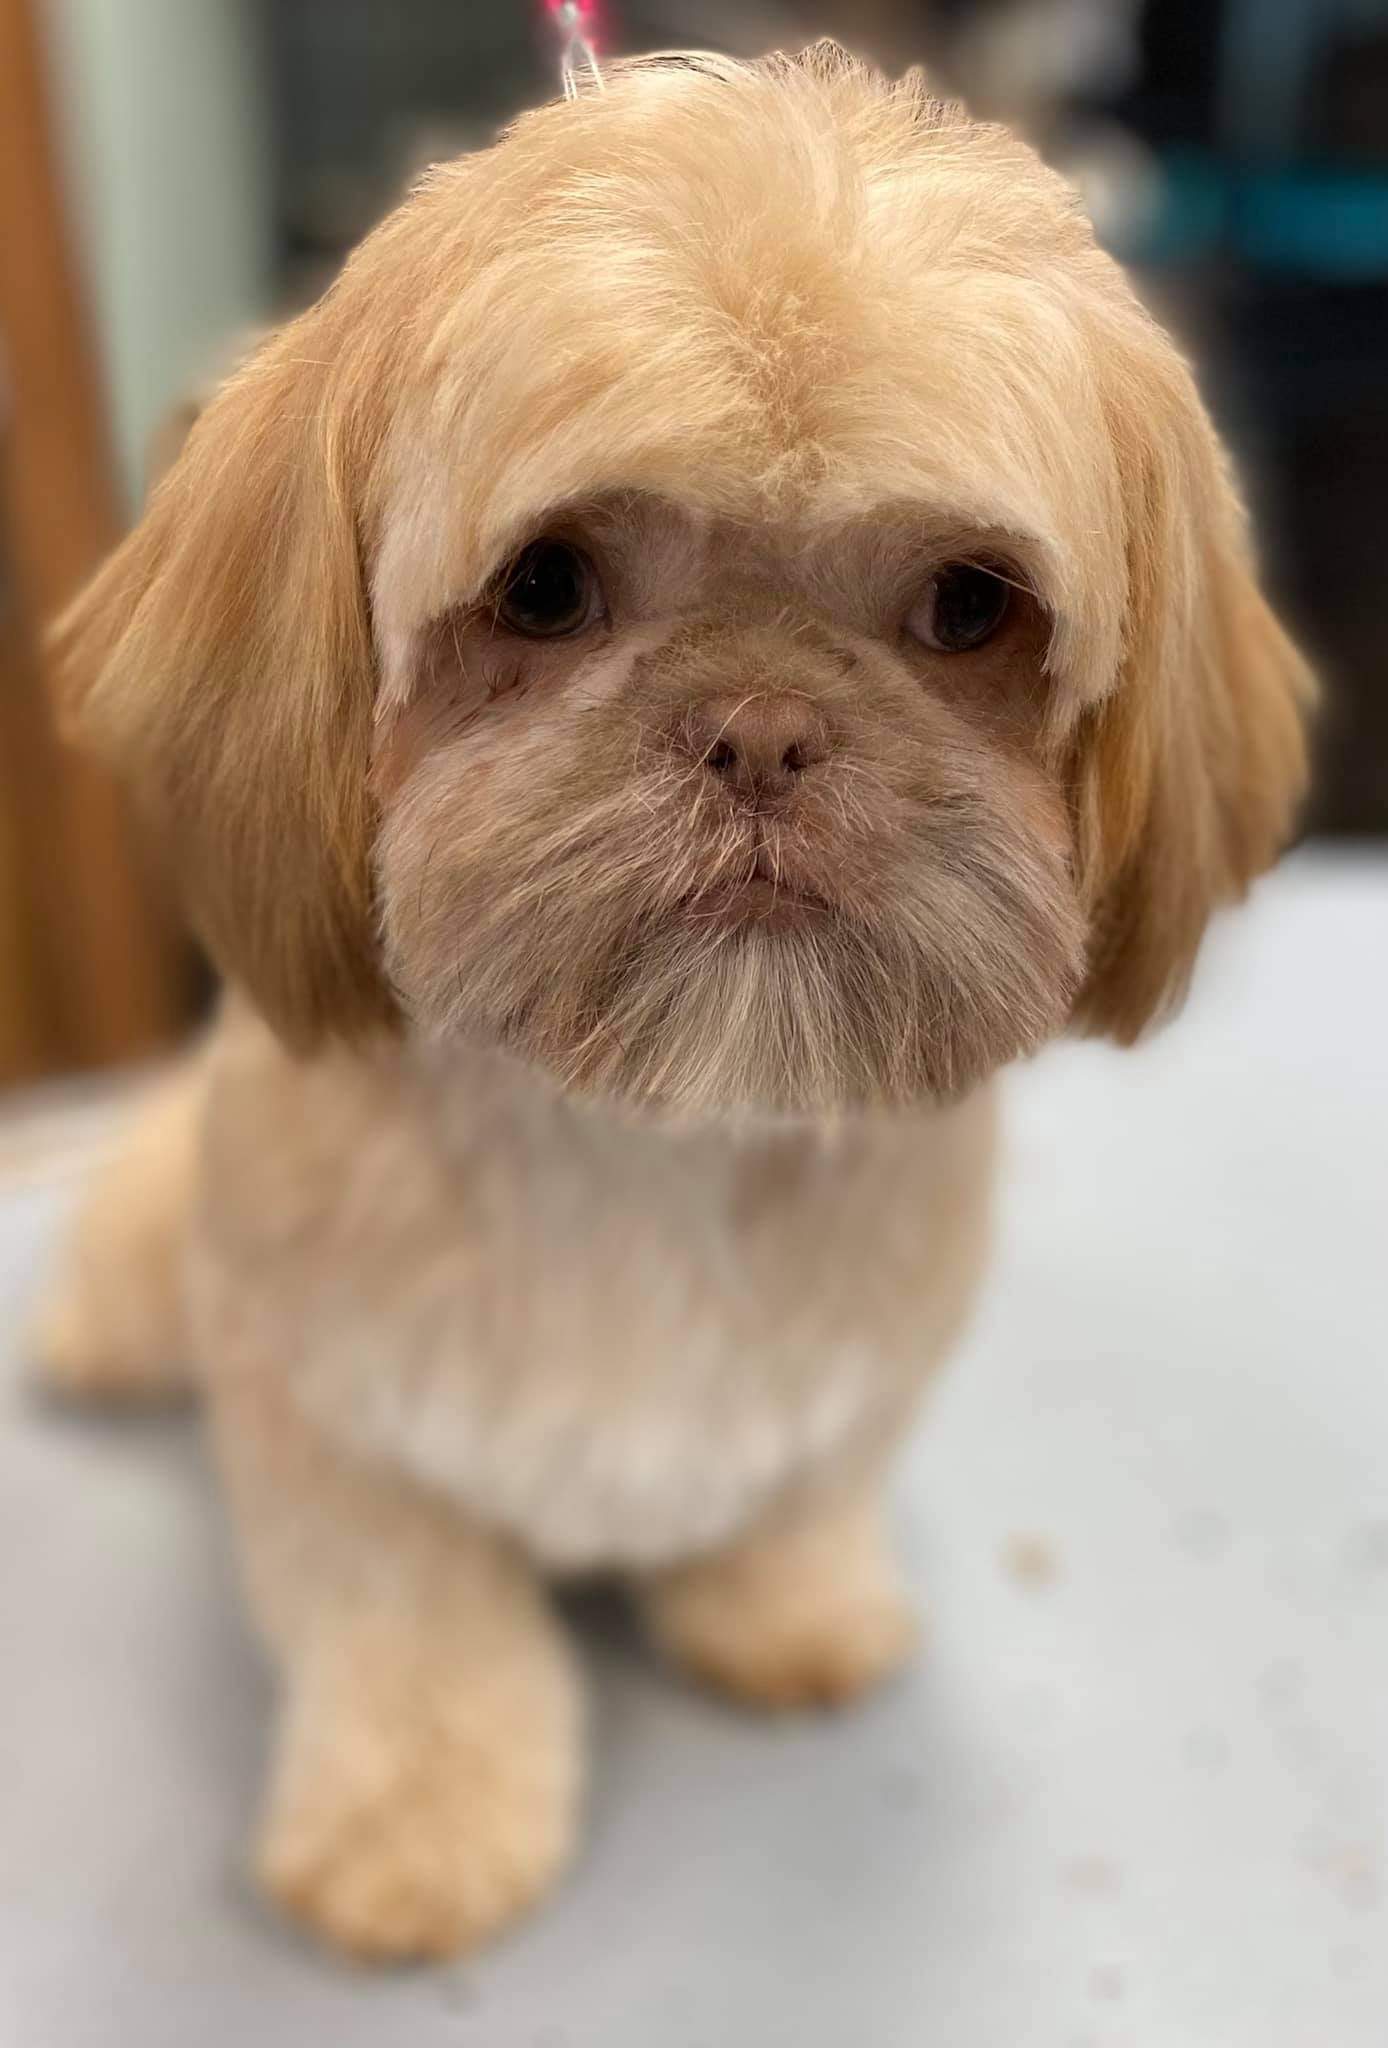 Shih Tzu groomed by student at mastergroomersacademy.com